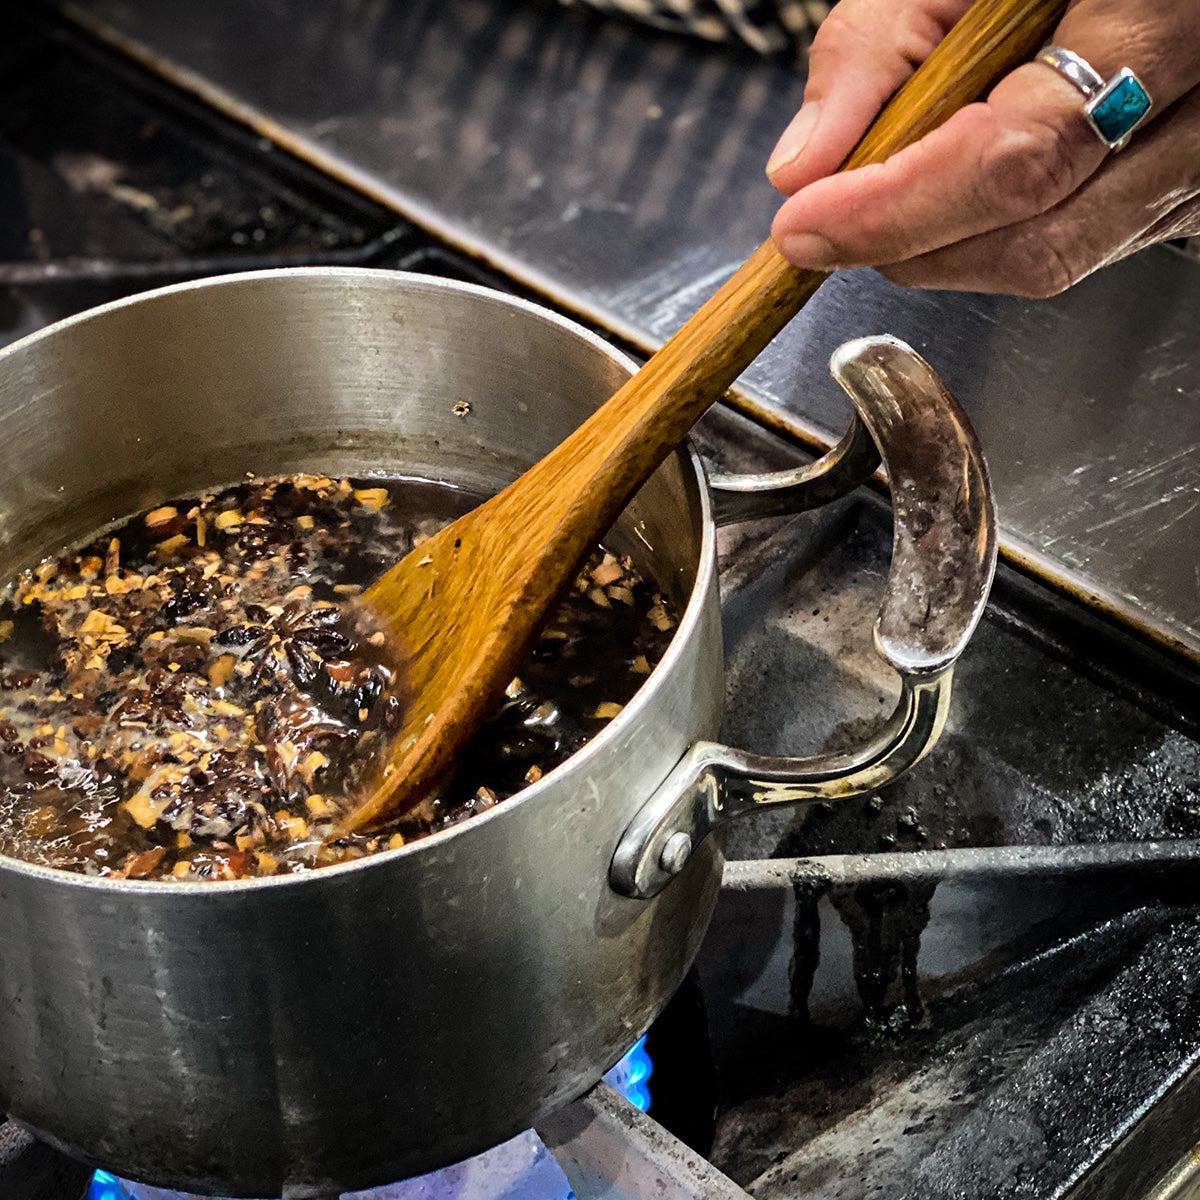 A pot over a stove top contains the sarsaparilla mix recipe and is being stirred by a wooden spoon.